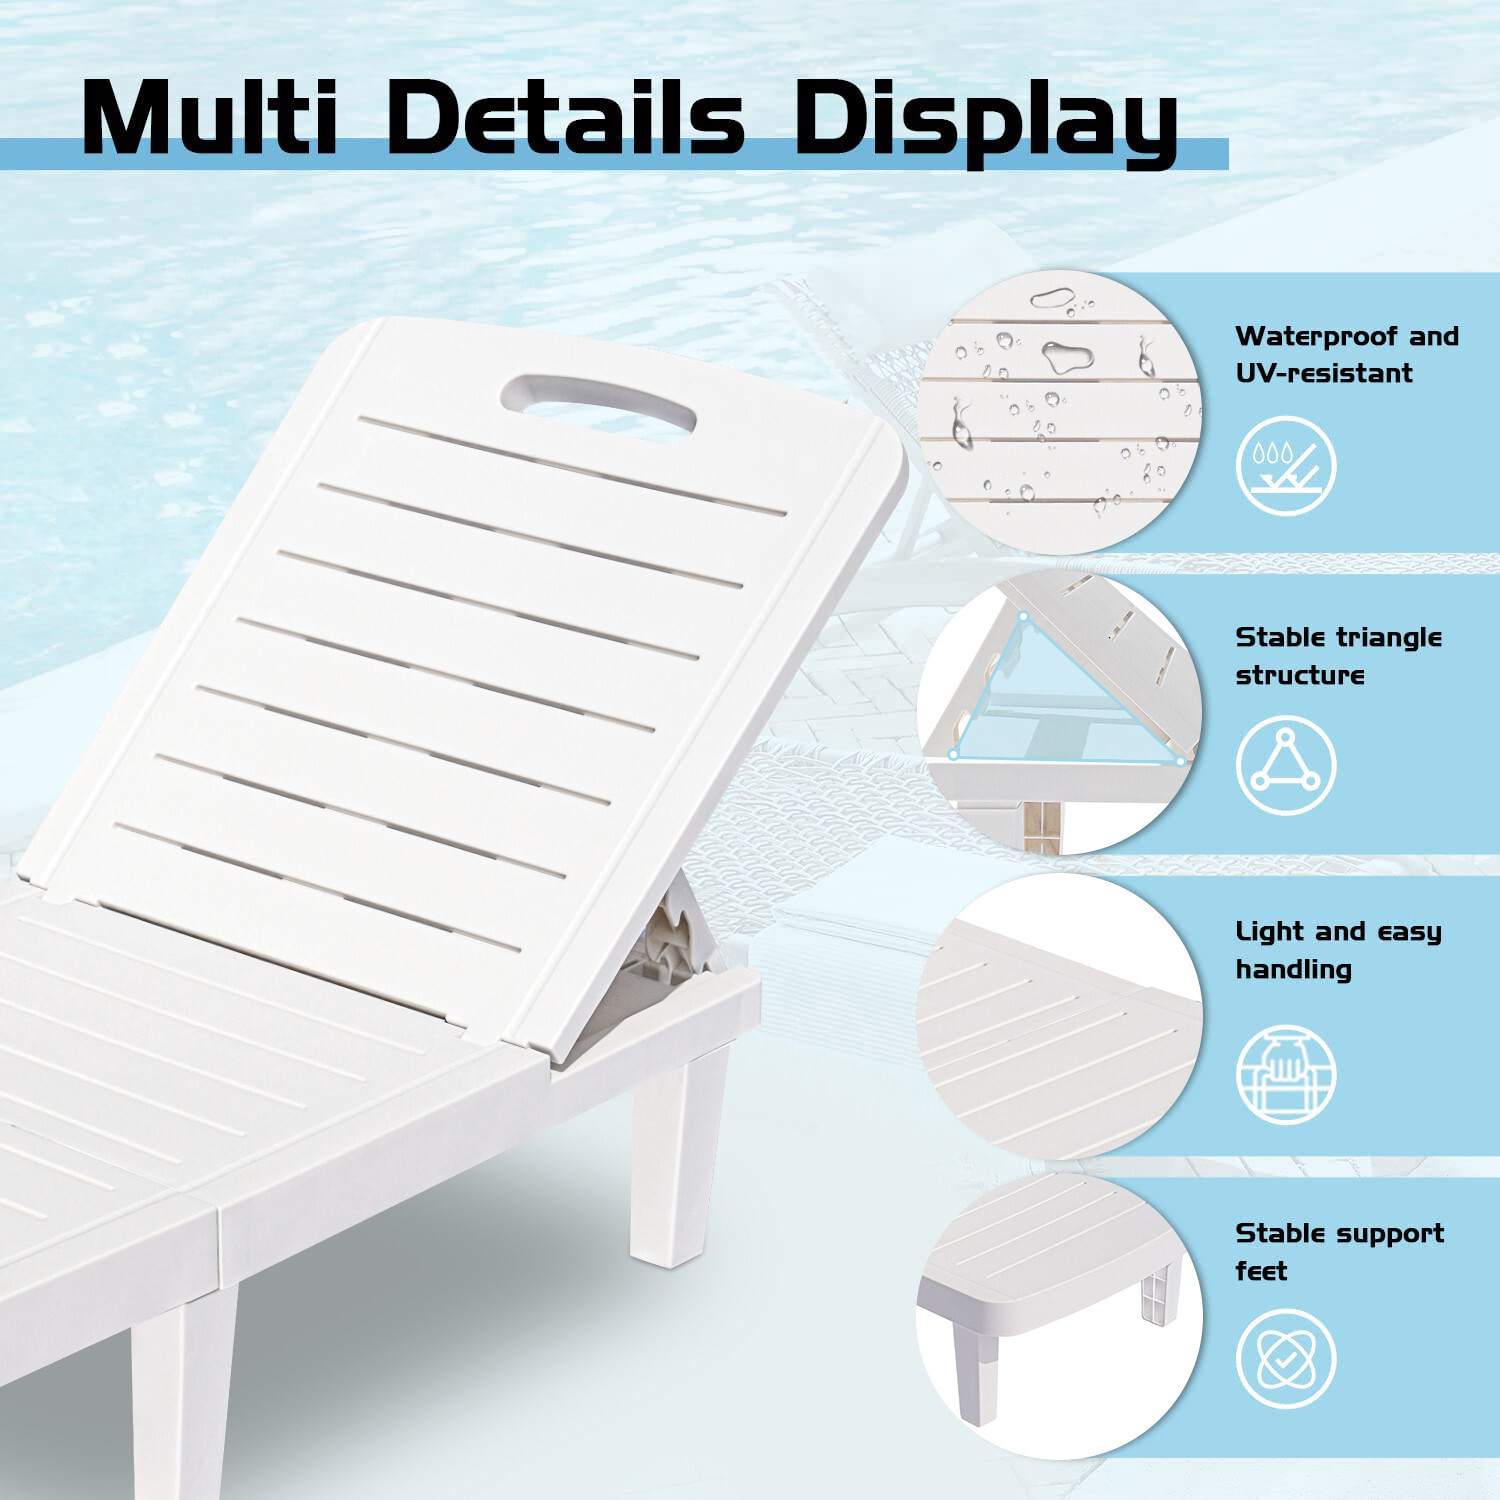 Patio Chaise Lounge Set of 2, Chaise Lounge Chairs Patio Furniture Set with Adjustable Back and Retractable Tray, All-Weather Plastic Reclining Lounge Chairs for Beach, Backyard, Garden, Pool, LLL1714 - image 5 of 10